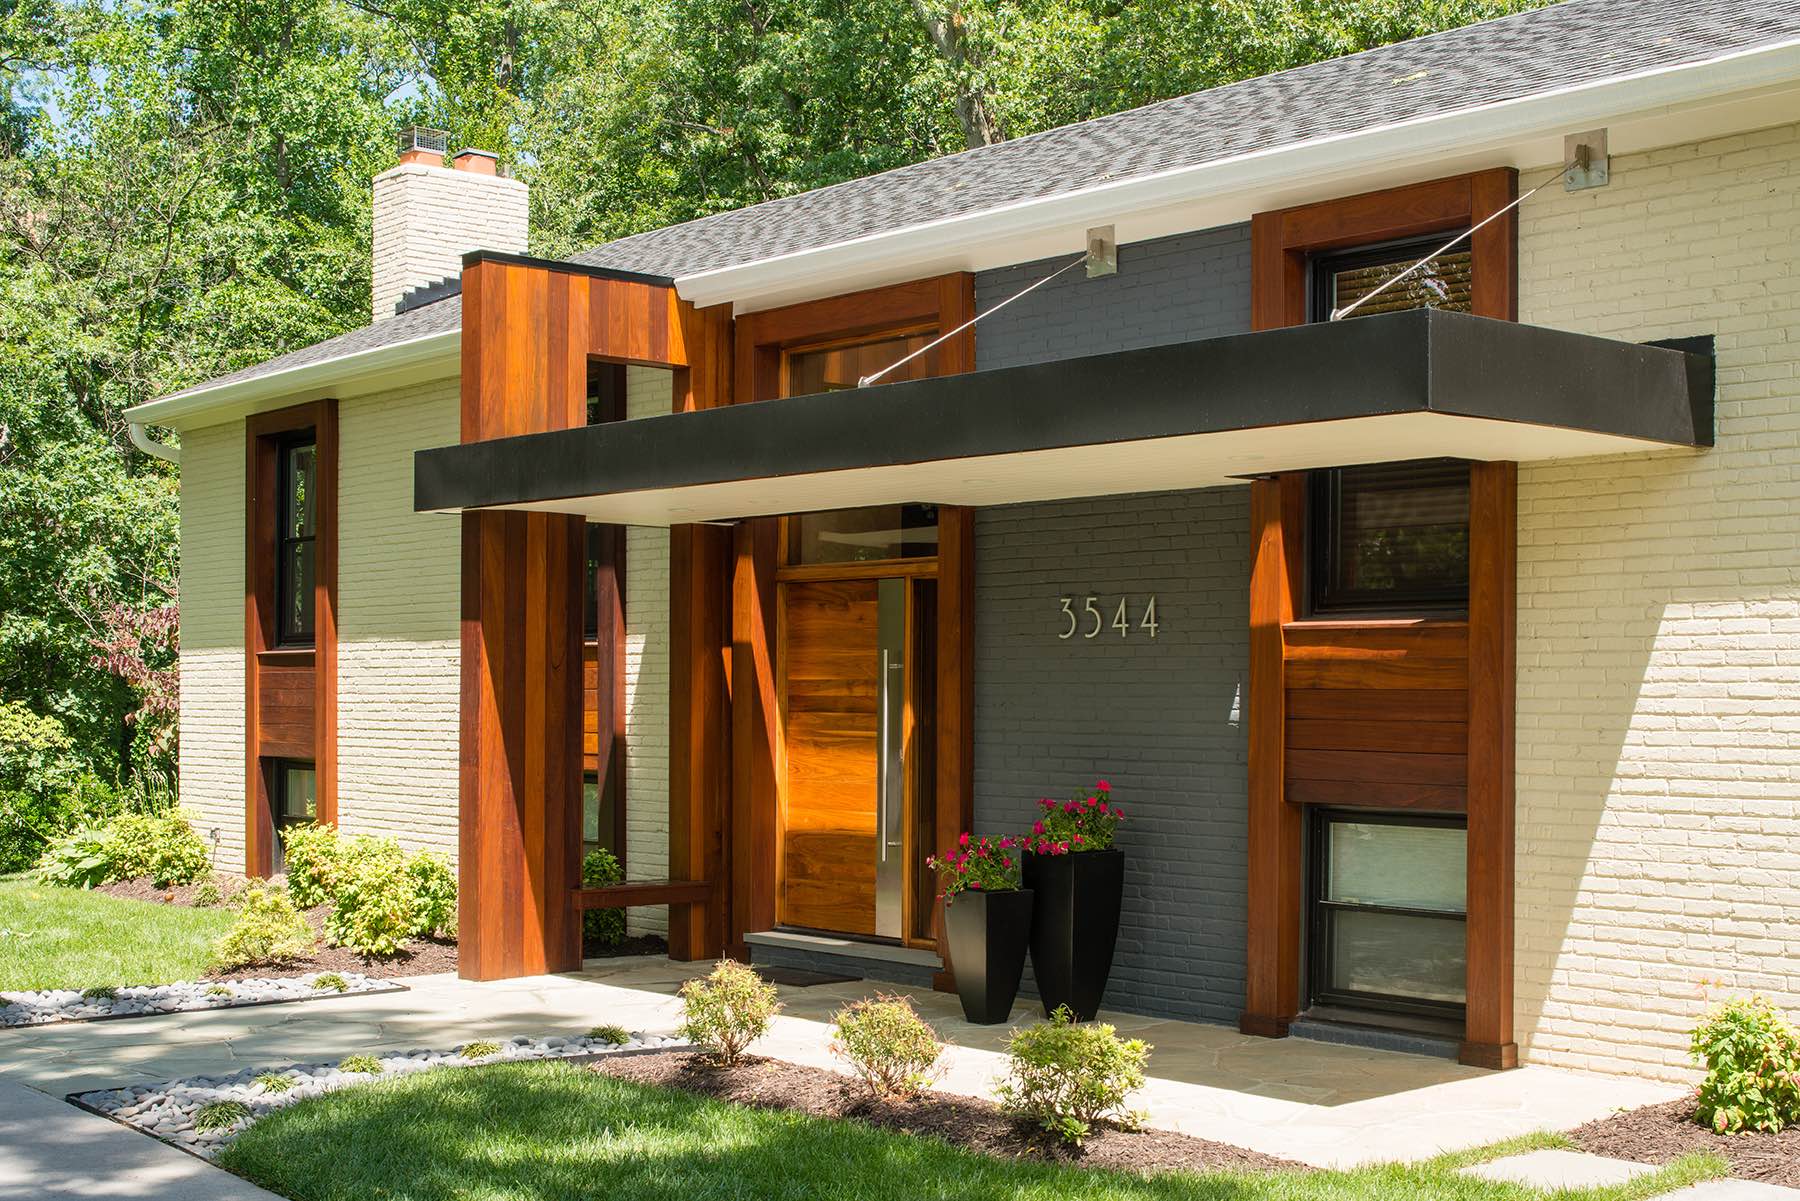 Contemporary home exterior with striking hanging portico and sculptural ipé wood